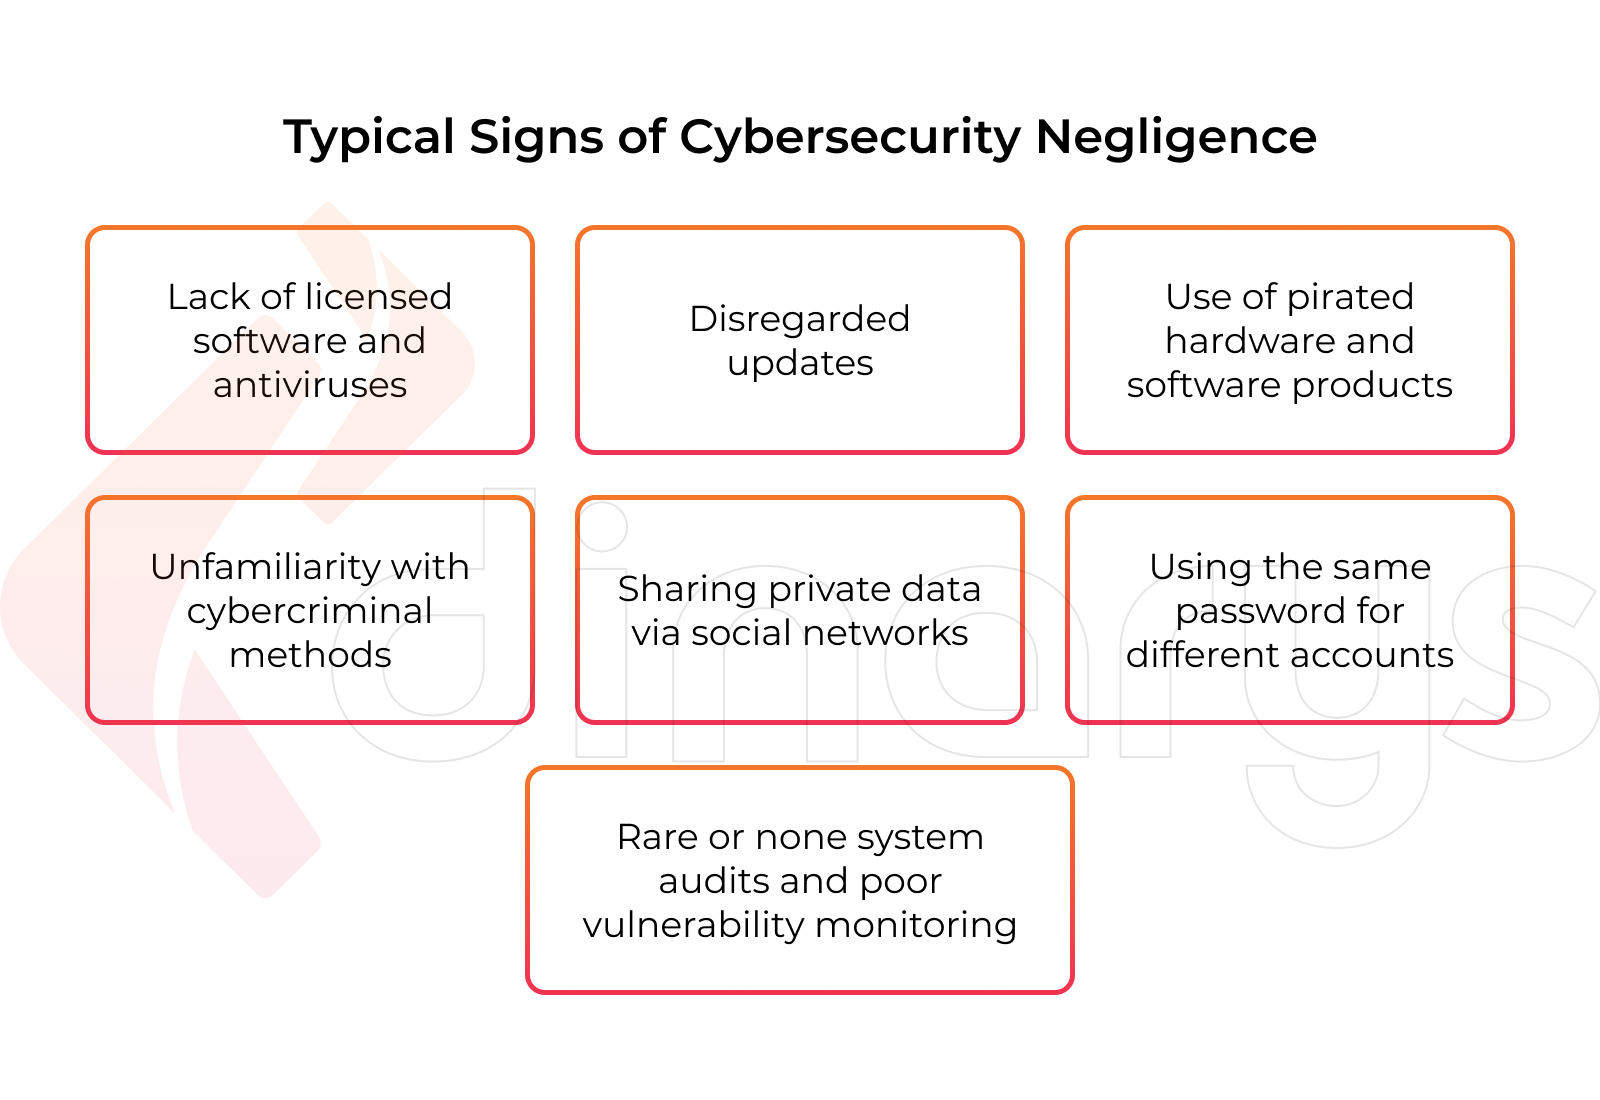 Typical Signs of Cybersecurity Negligence